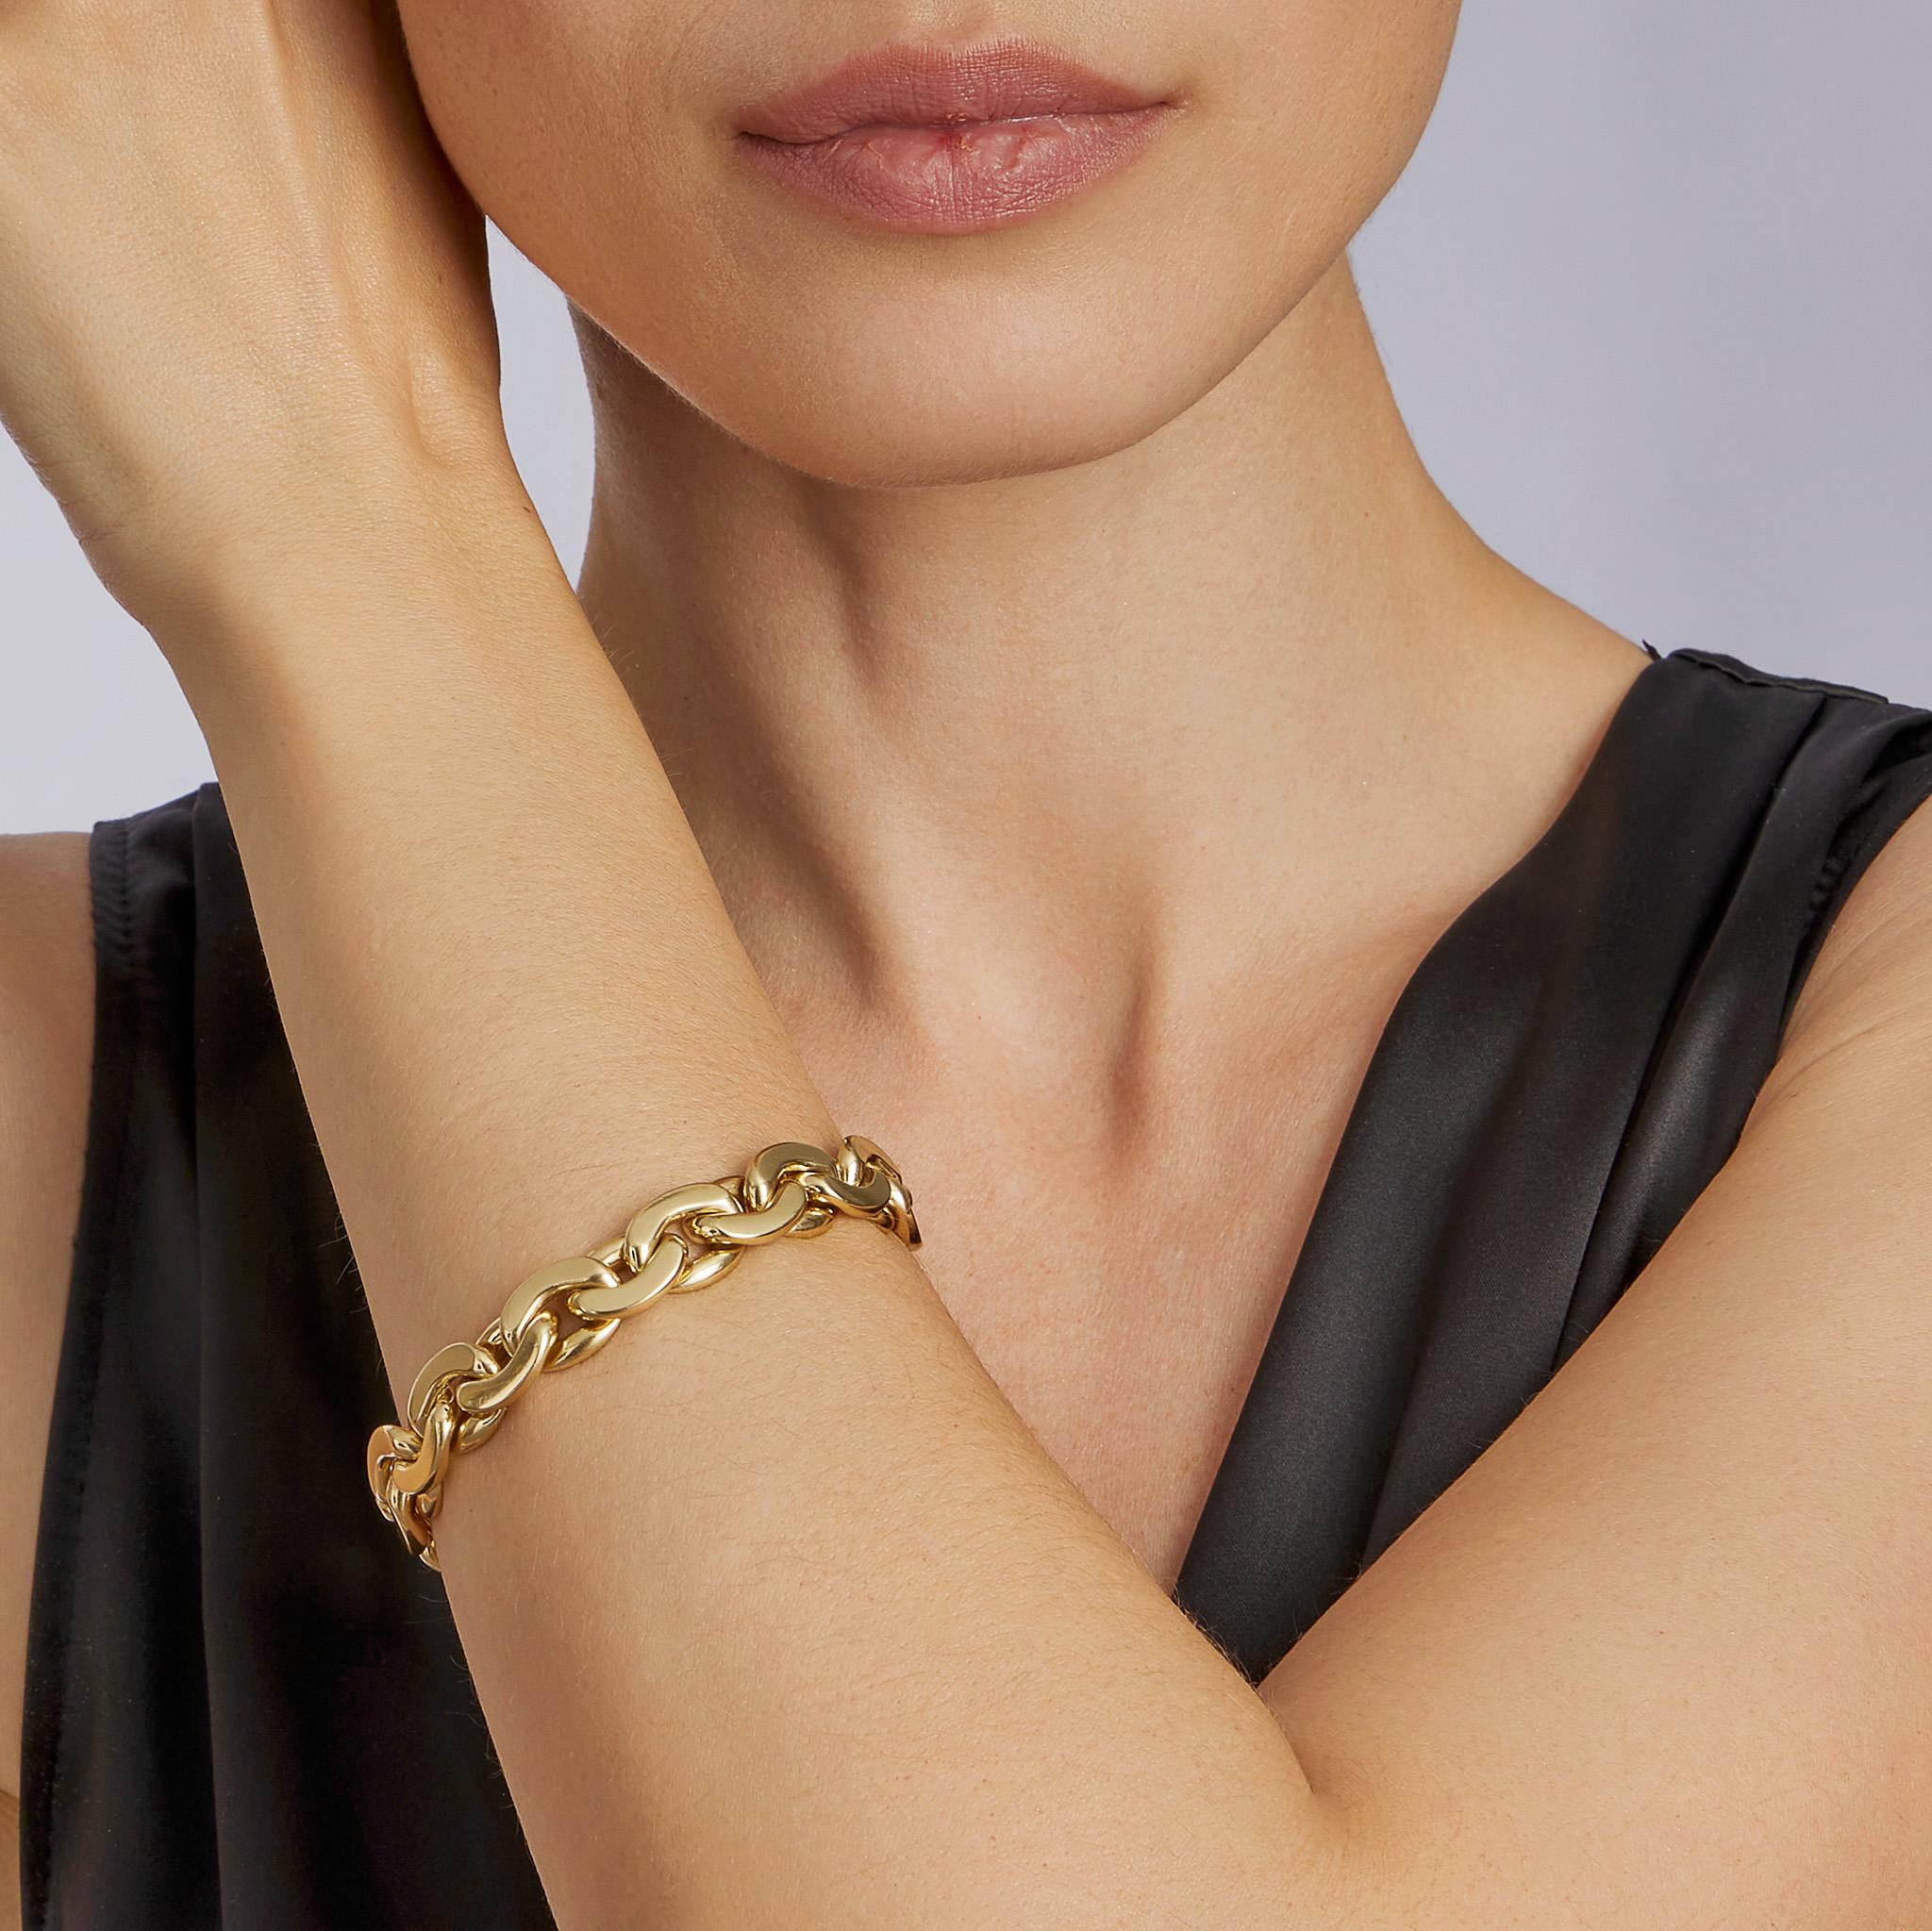 Dating from the 1970s, this streamlined, flattened curb link bracelet by Tiffany & Co. Italy is composed of polished 18K gold. A beautiful form in both modeling and proportion, this maximally soft and flexible bracelet of satisfying weigh pairs well